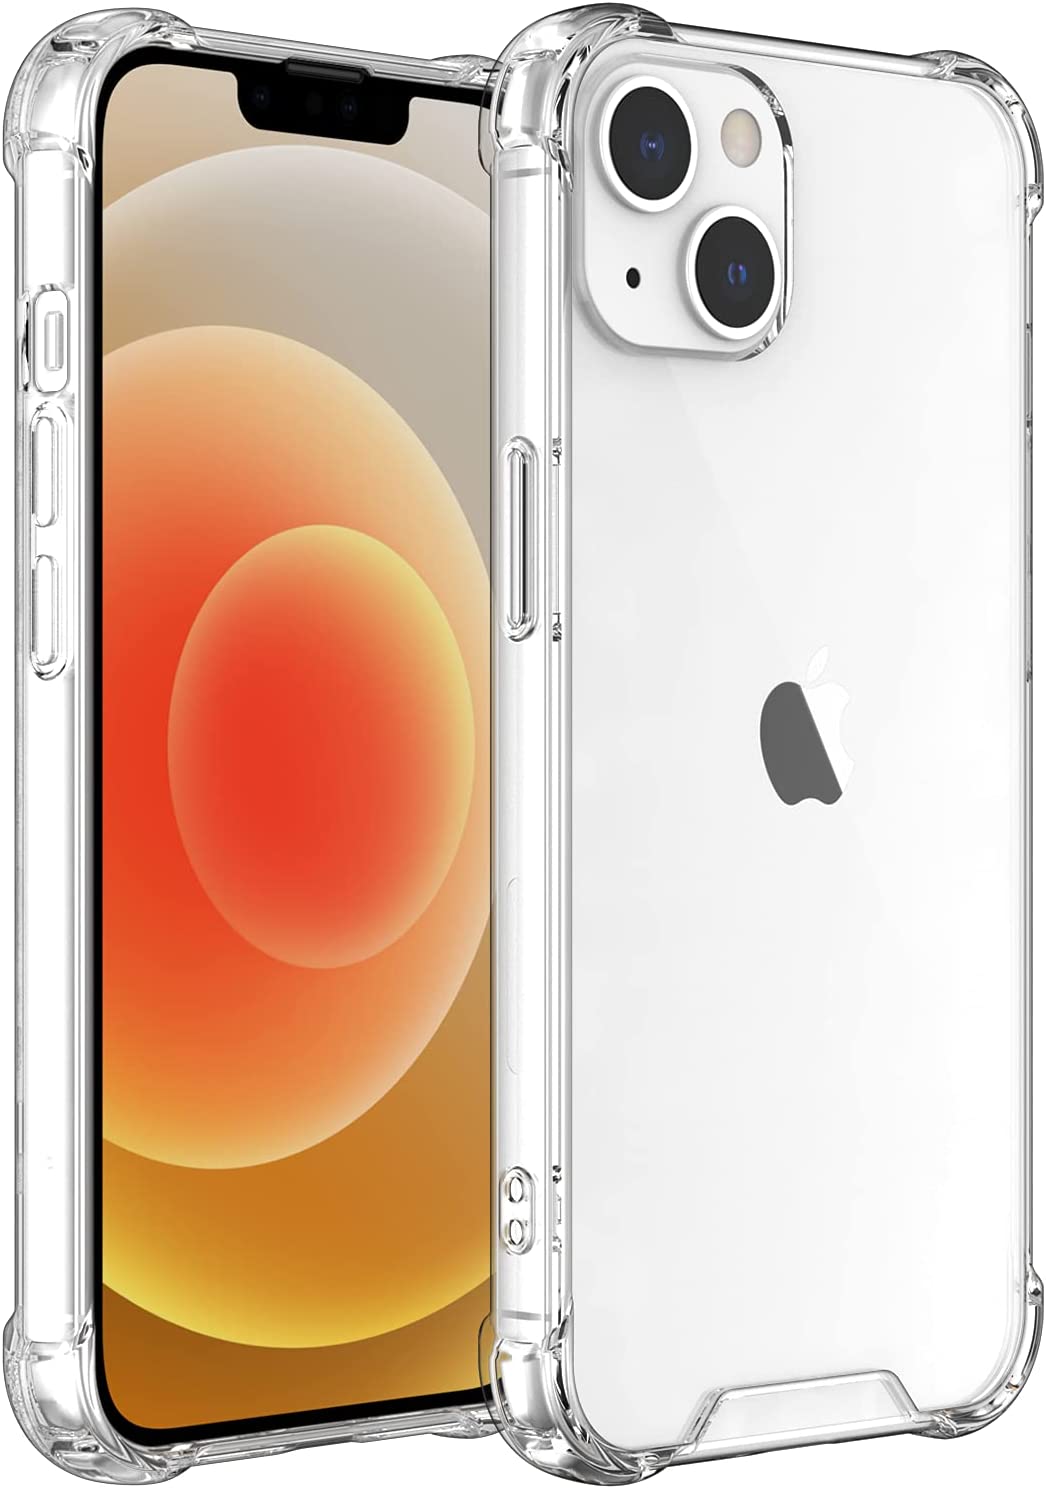 Carcasa IPhone 8 - Punto Cell Chile